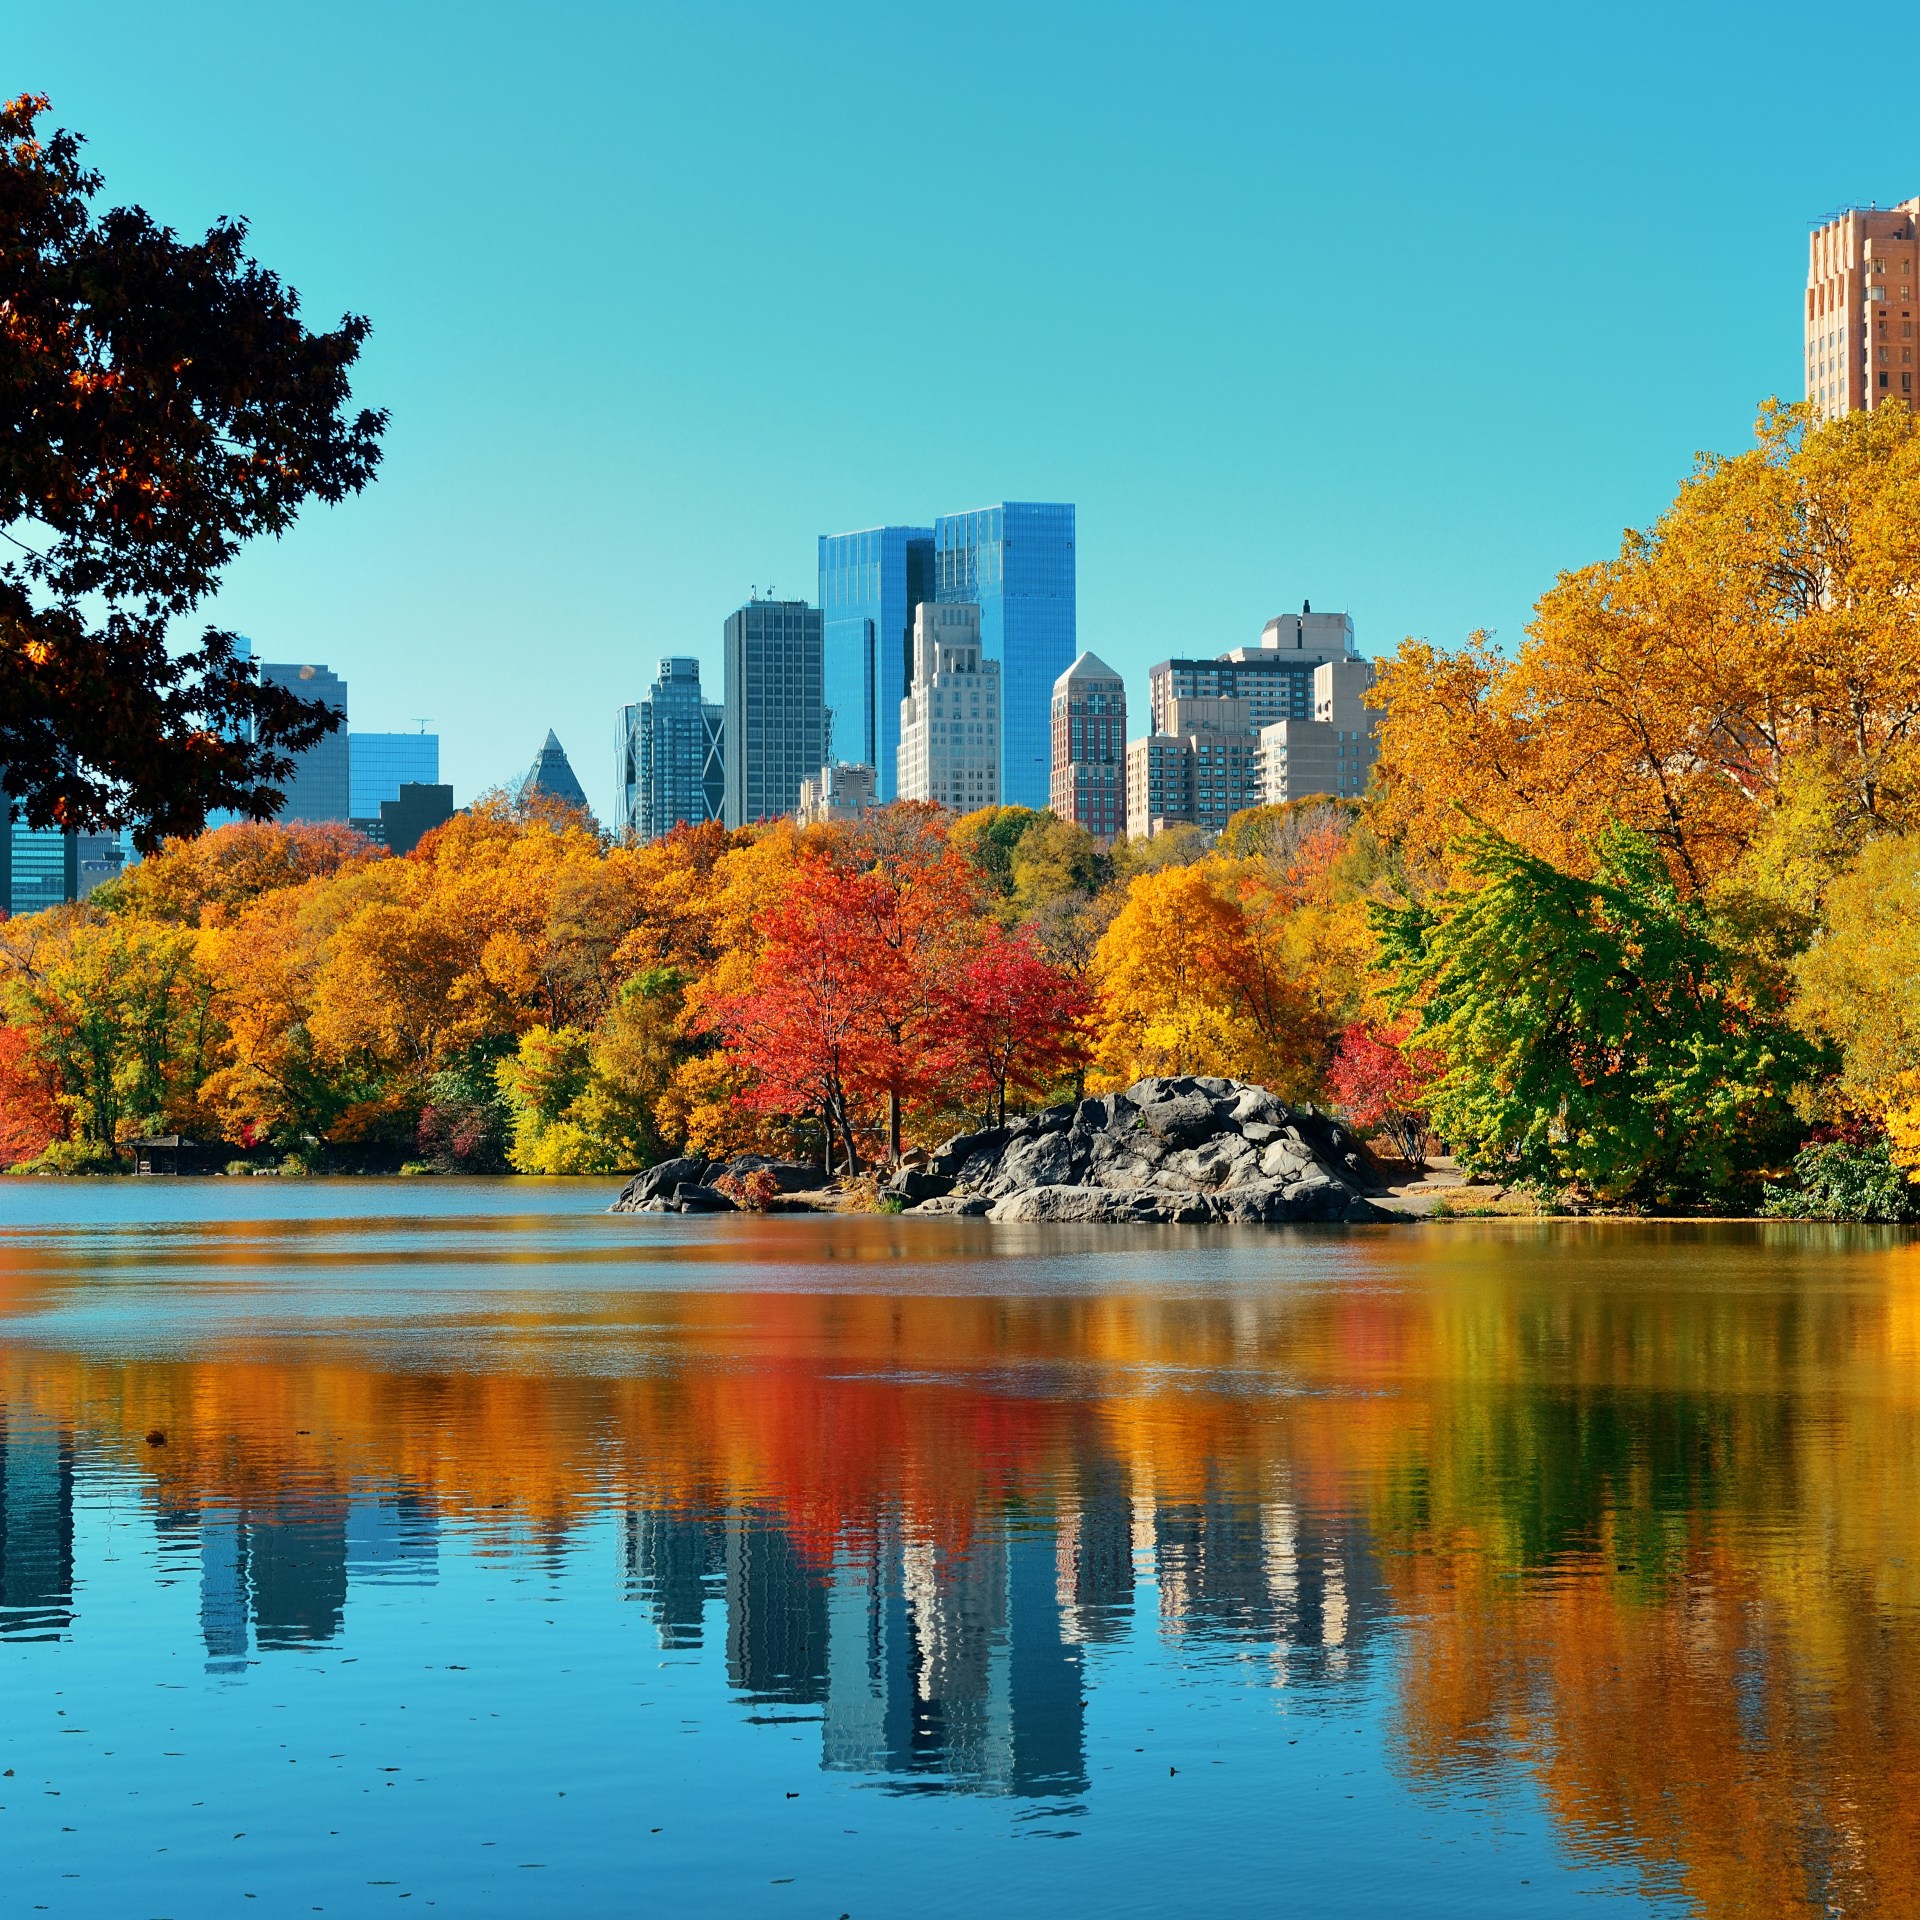 Central,Park,Autumn,And,Buildings,Reflection,In,Midtown,Manhattan,New